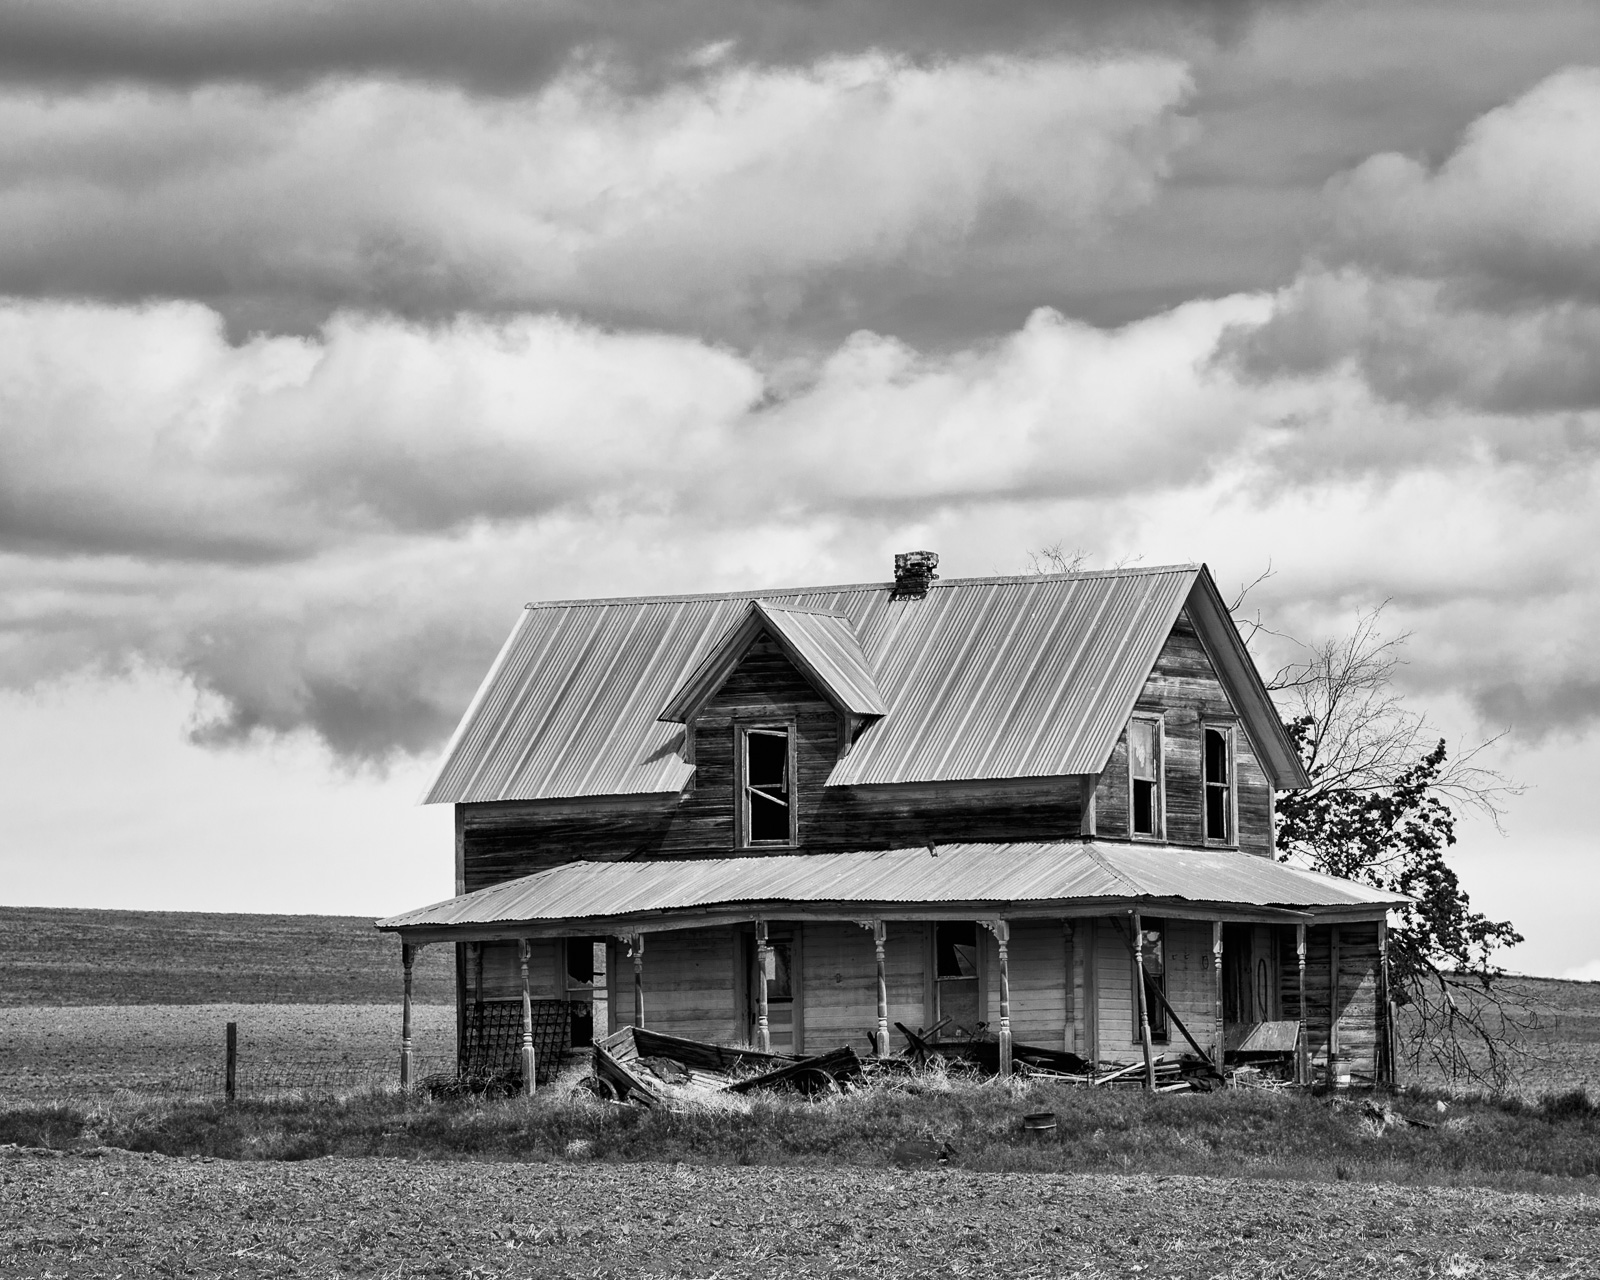 A black and white photograph of an old abandoned farmhouse in rural Douglas County, Washington.